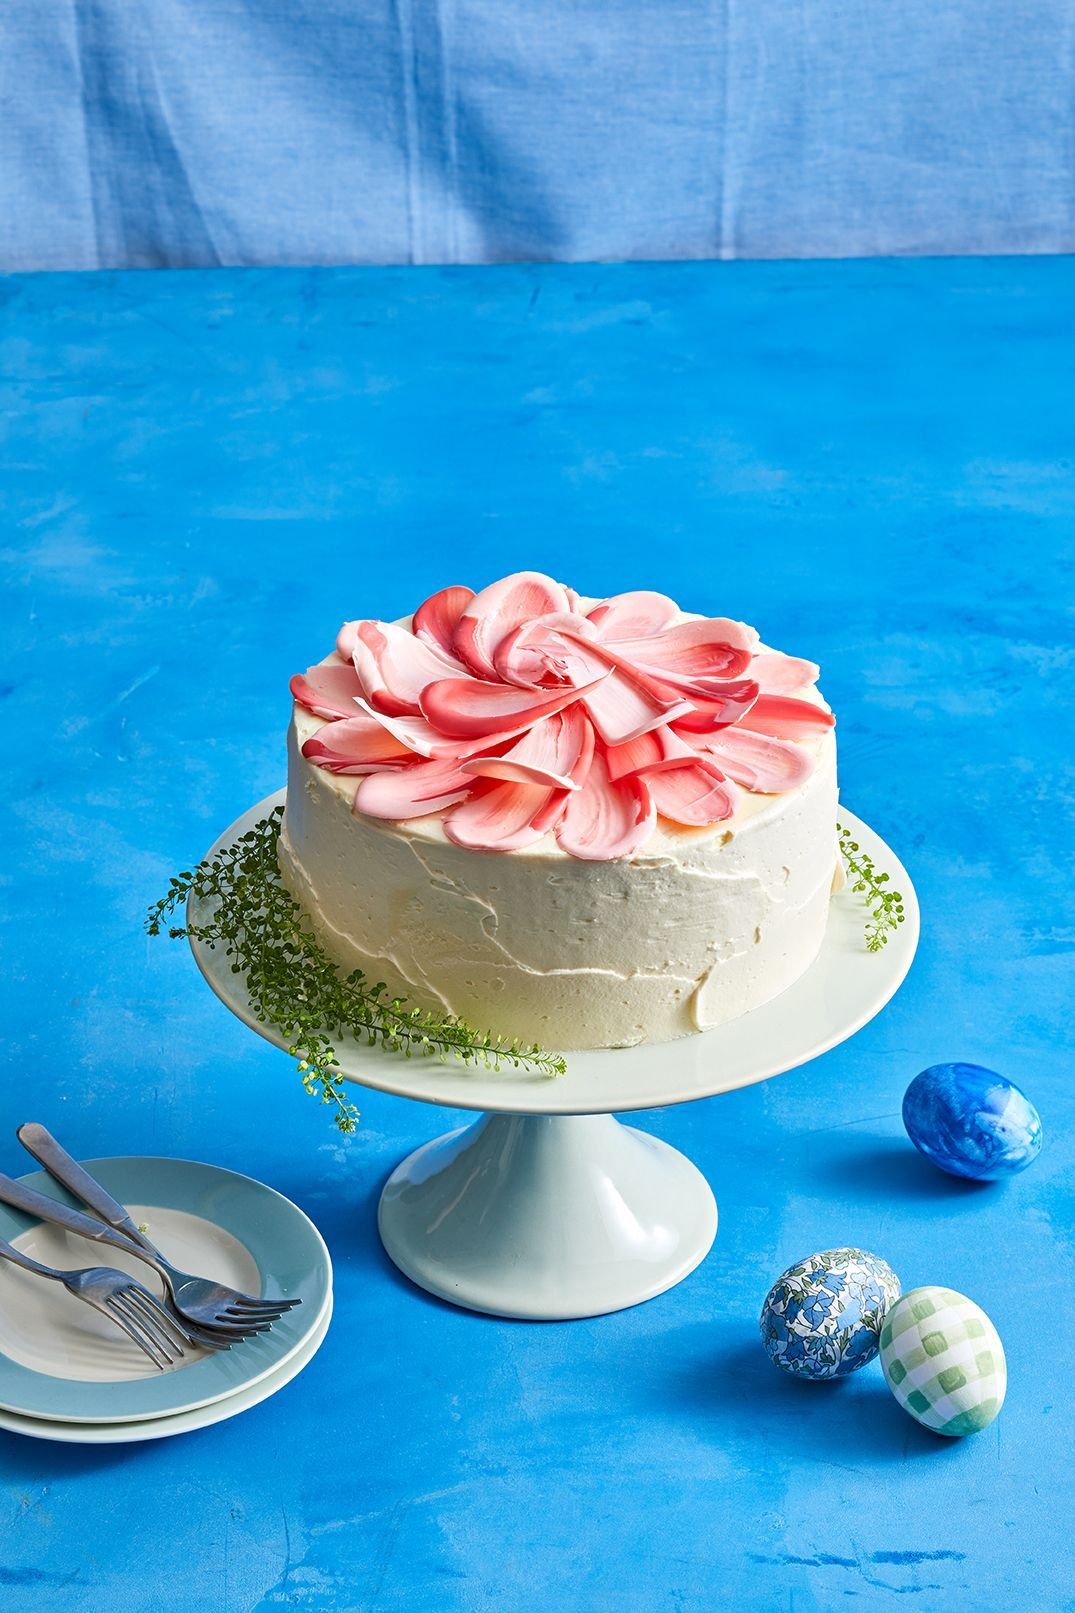 20 Awesome Summer Cakes Ideas - Find Your Cake Inspiration